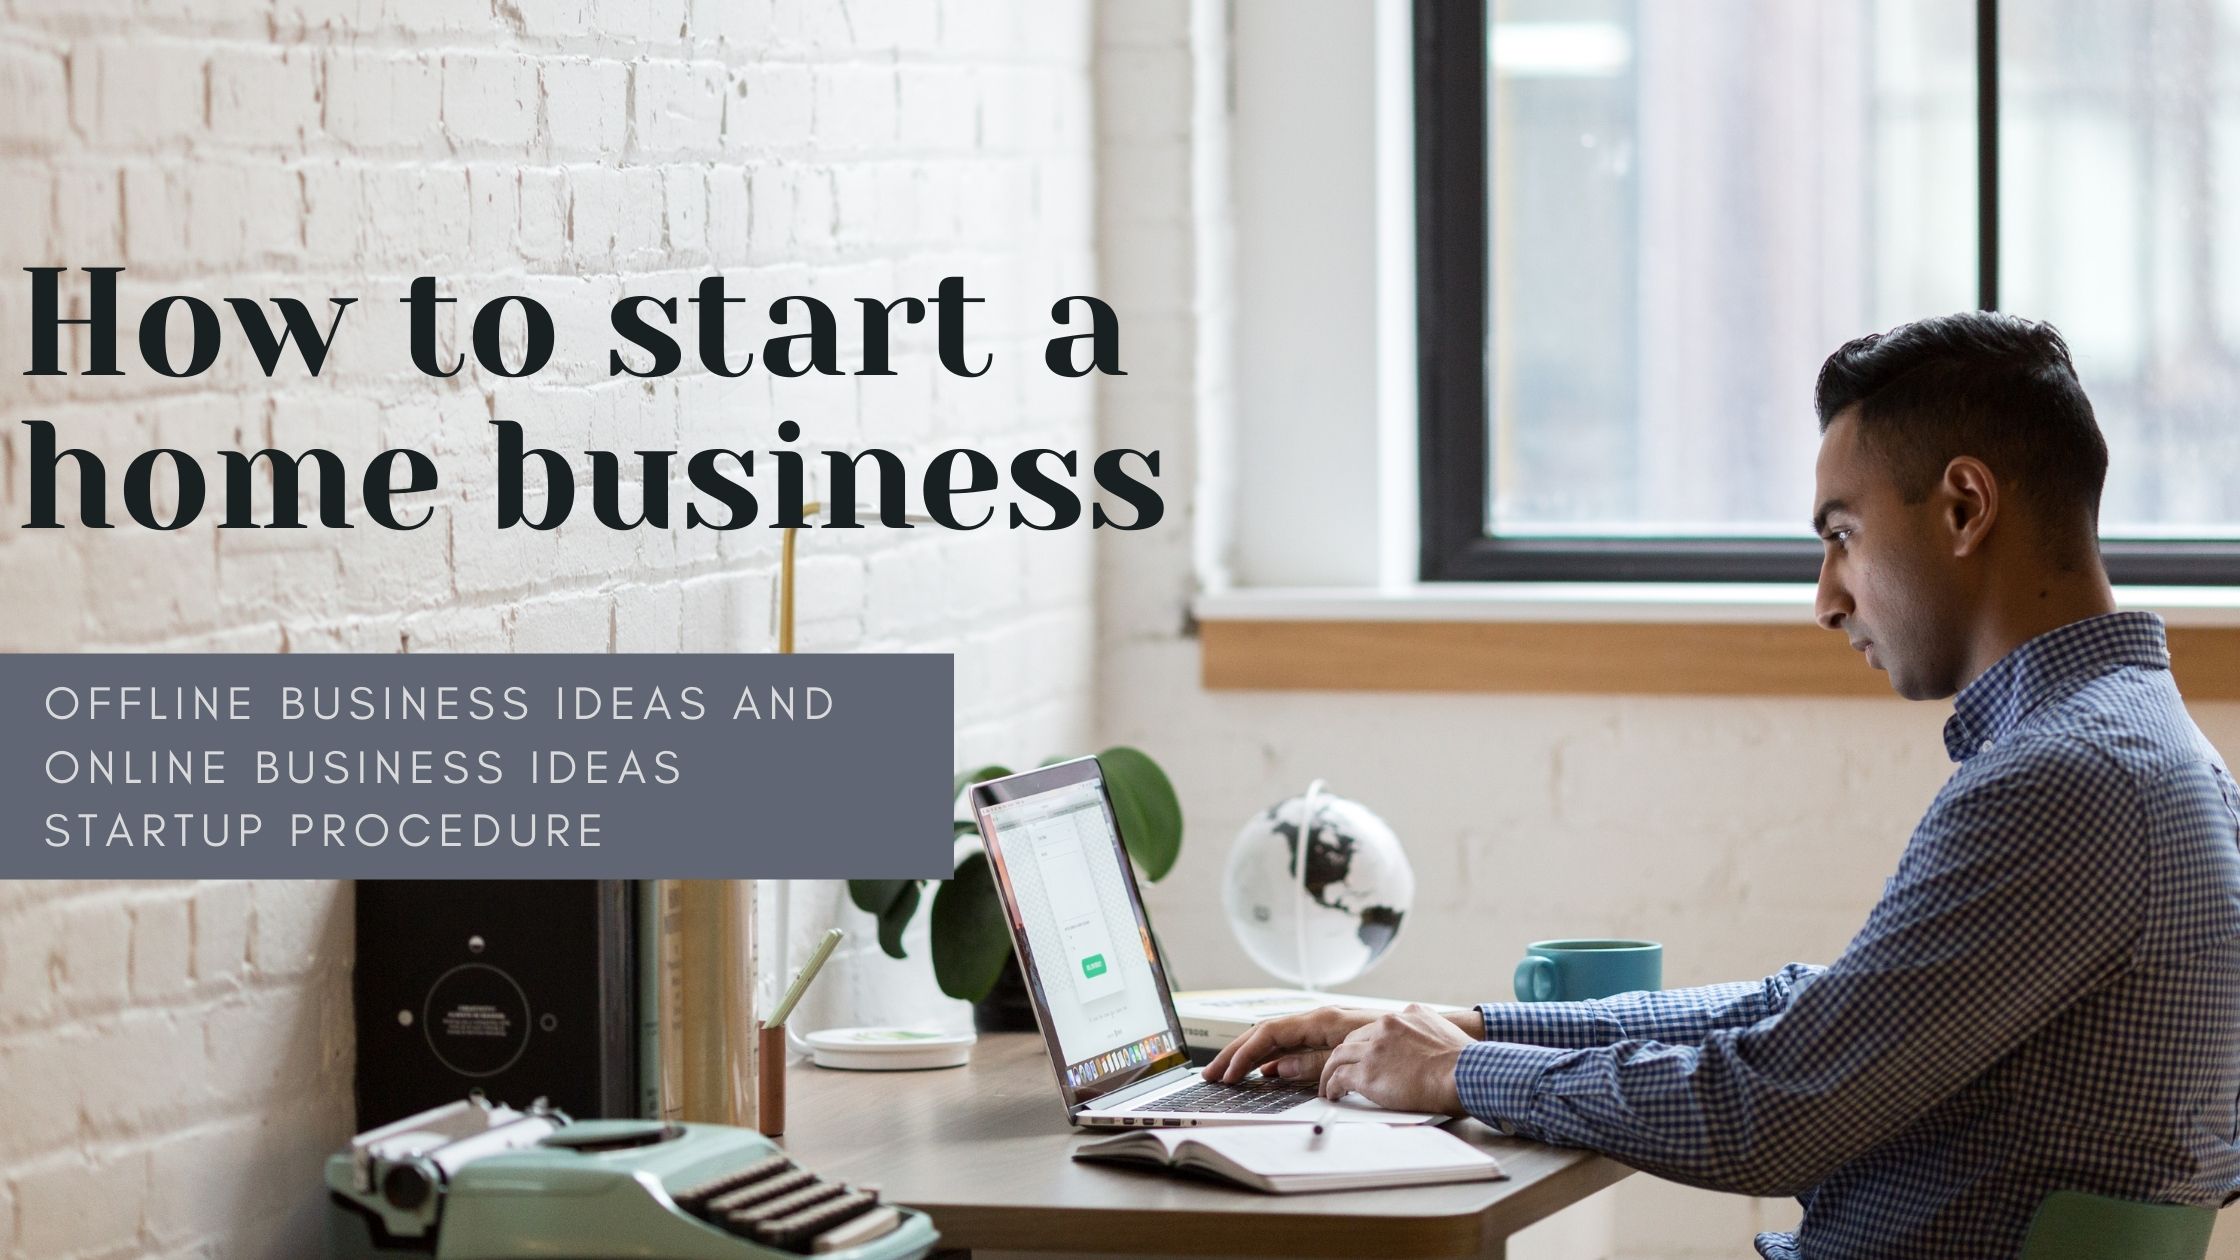 How to start a home business